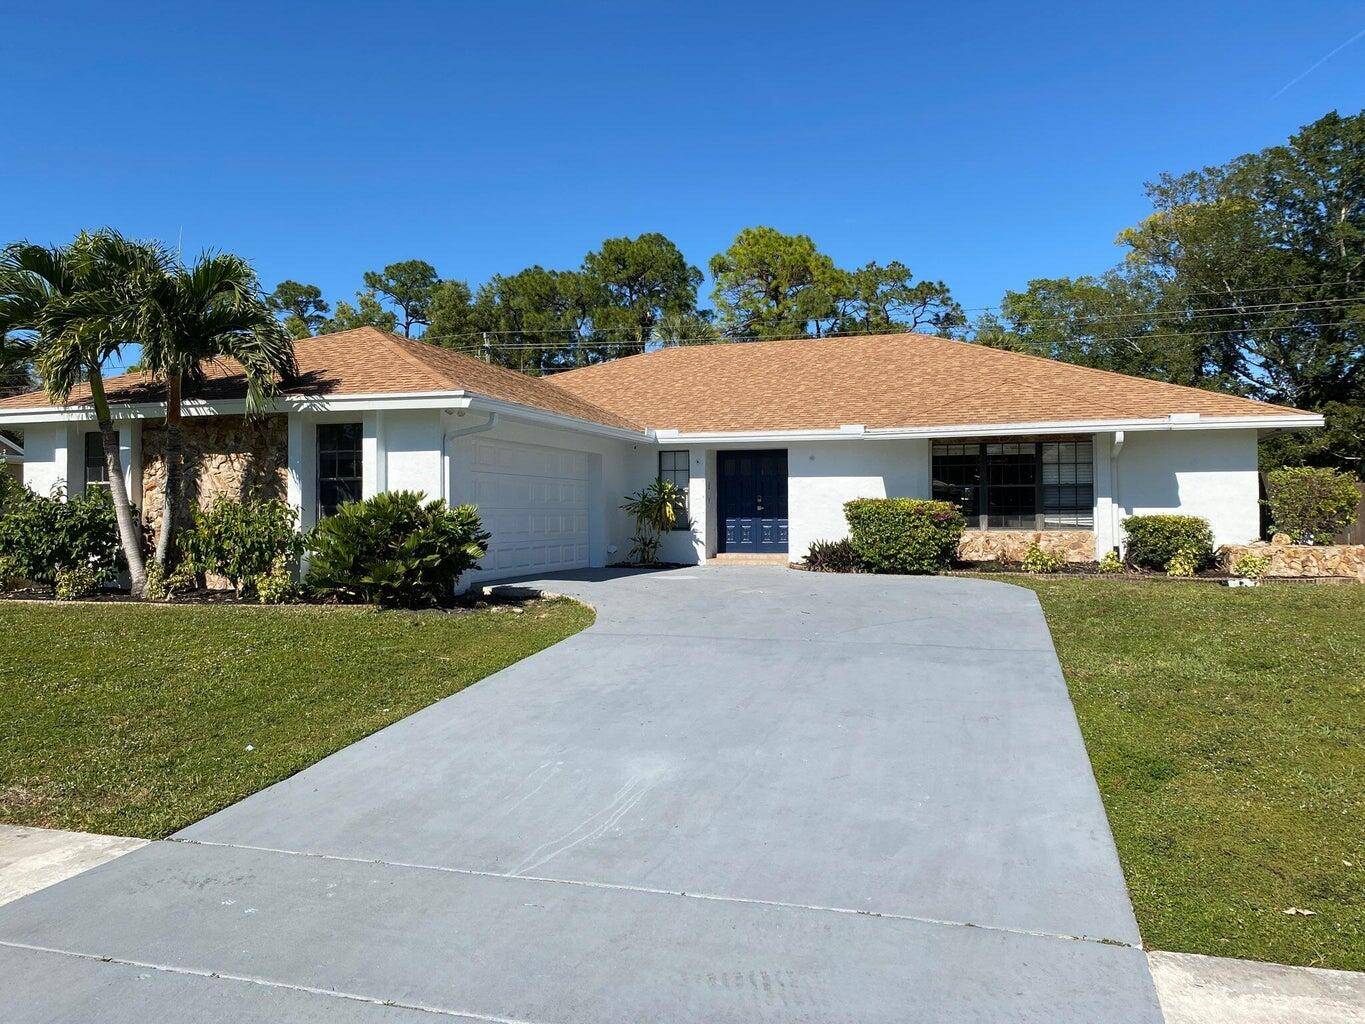 Don't miss out on this beautiful 4 bed, 3 full bath Pool home equipped with a pool heater, newer AC, renovated bath, freshly painted interior and exterior situated on a ...